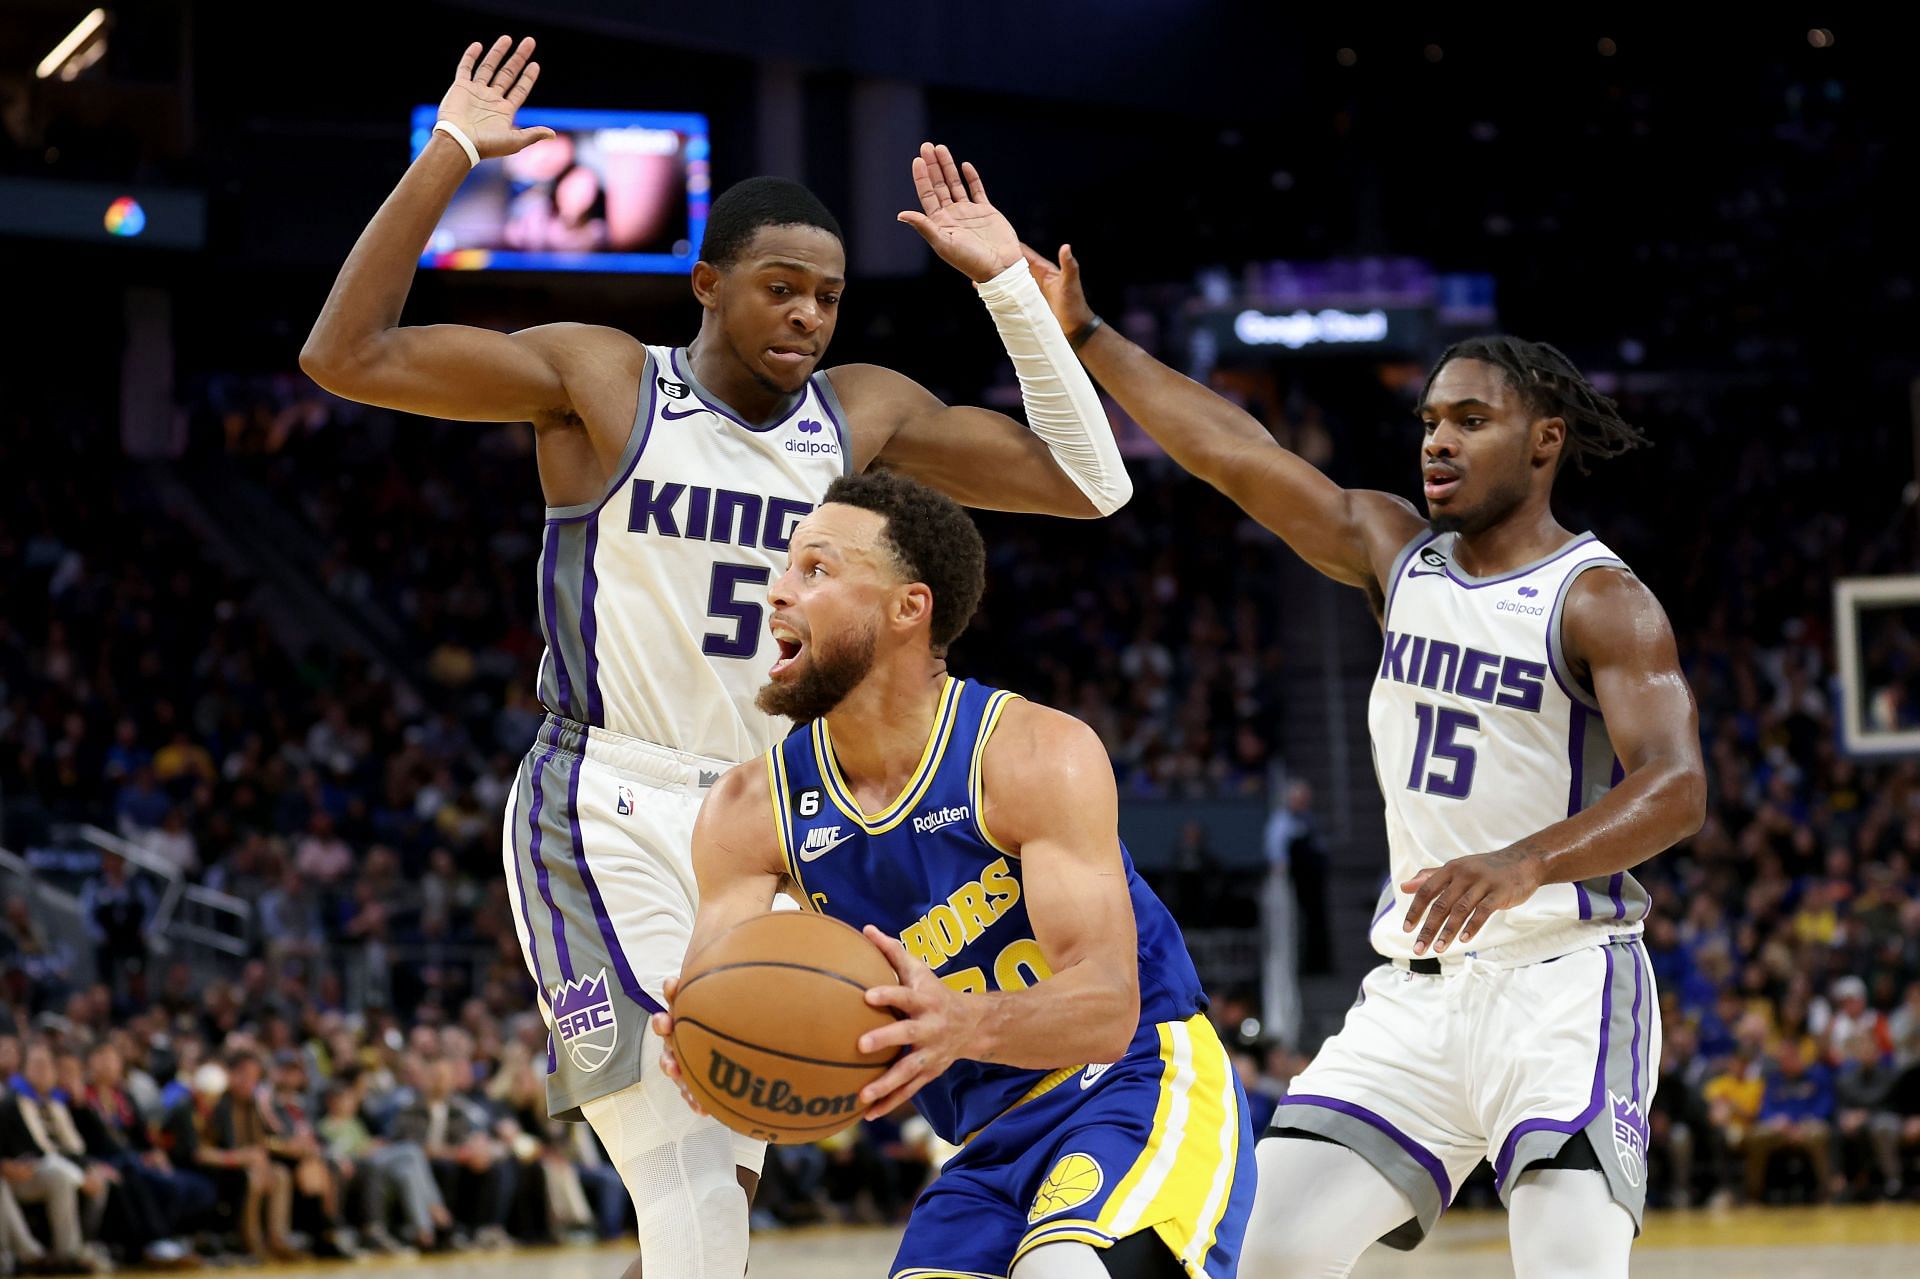 The Golden State Warriors and Sacramento Kings were off to a high-octane battle to start their series.